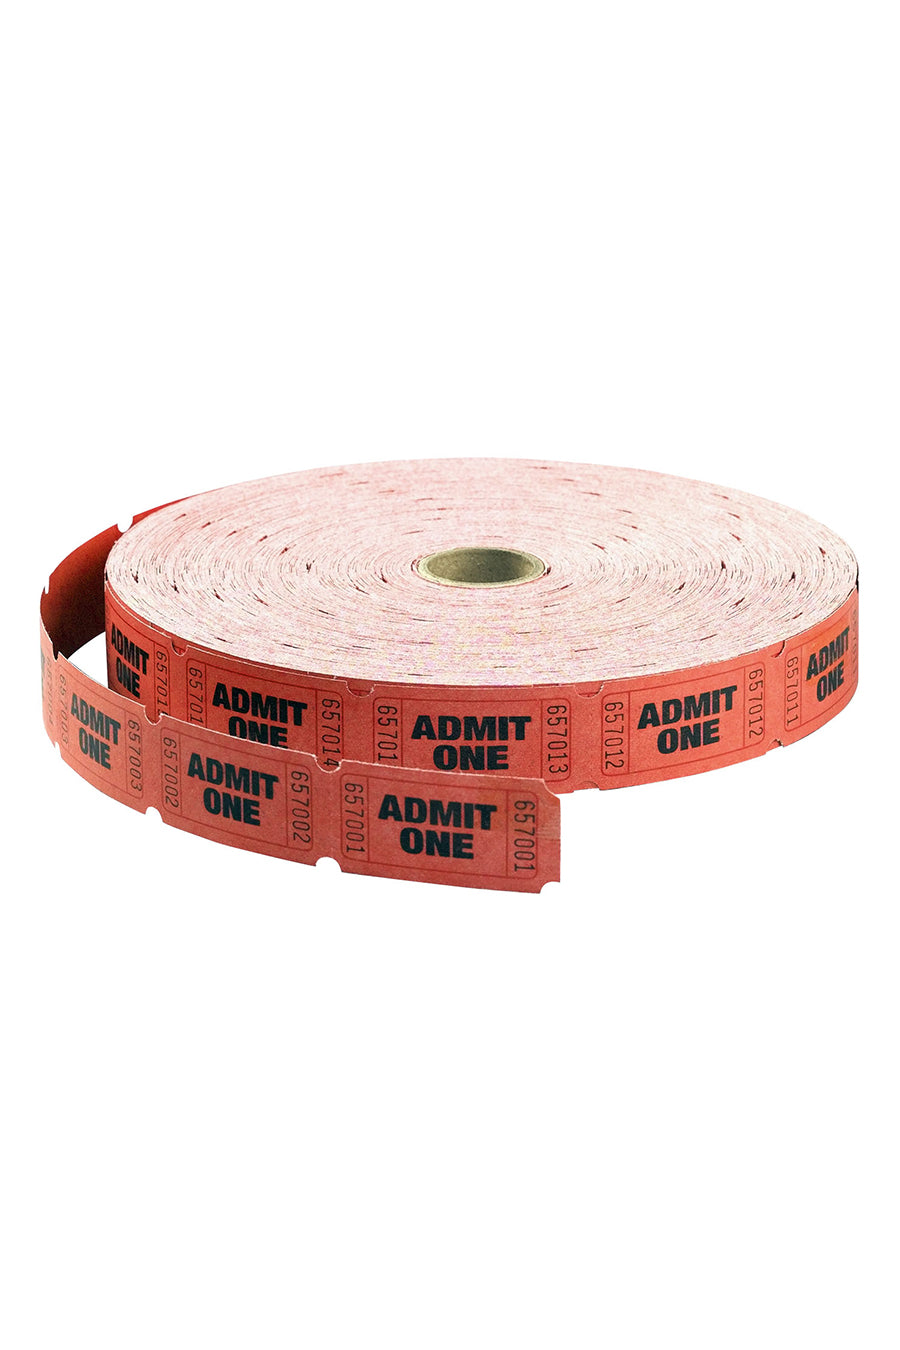 Single Ticket Roll, "Admit One", Red, 2000 Tickets/Roll